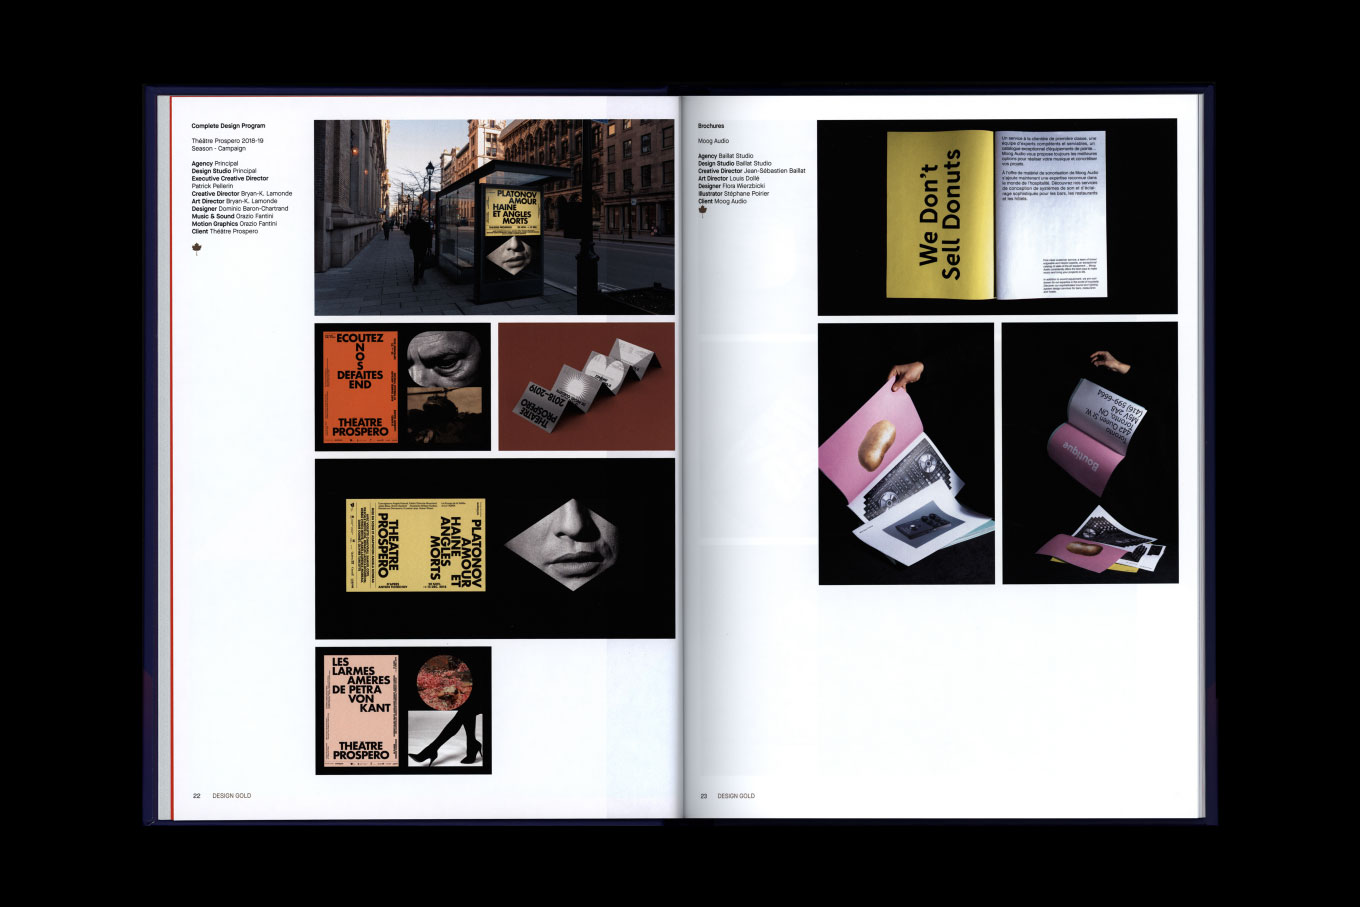 Spread of the ADCC book